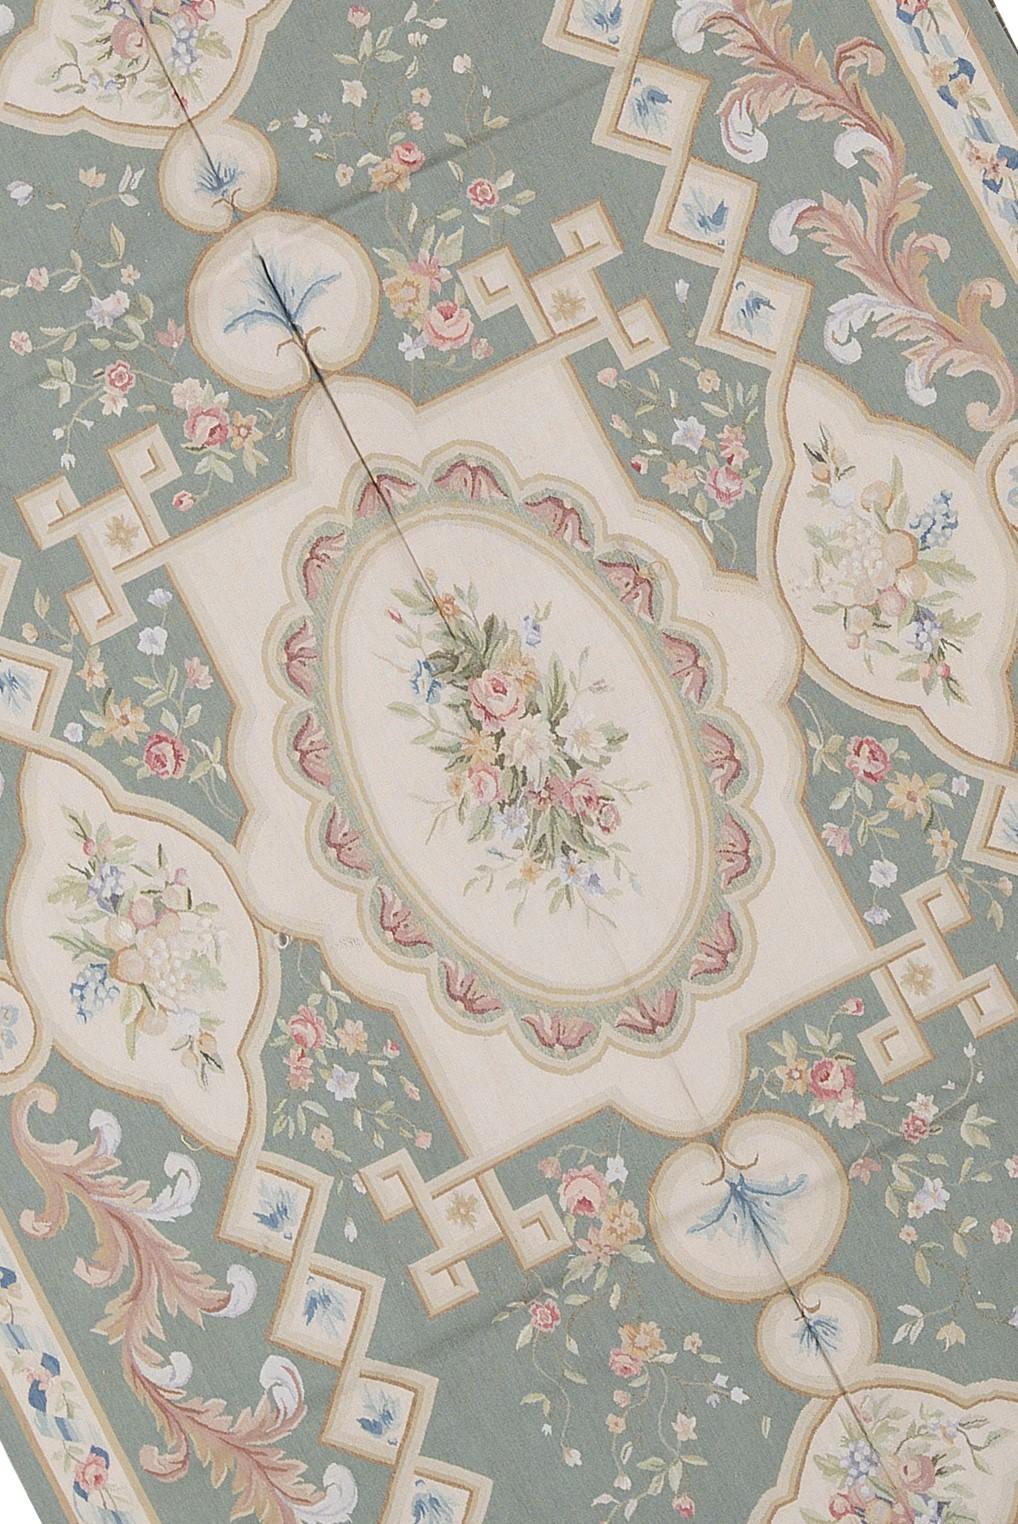 Handwoven recreation of the classic French flat-weave Aubusson rugs that have been found in the finest homes and palaces since the late 17th century. Size: 5' 11'' x 9' 2''.